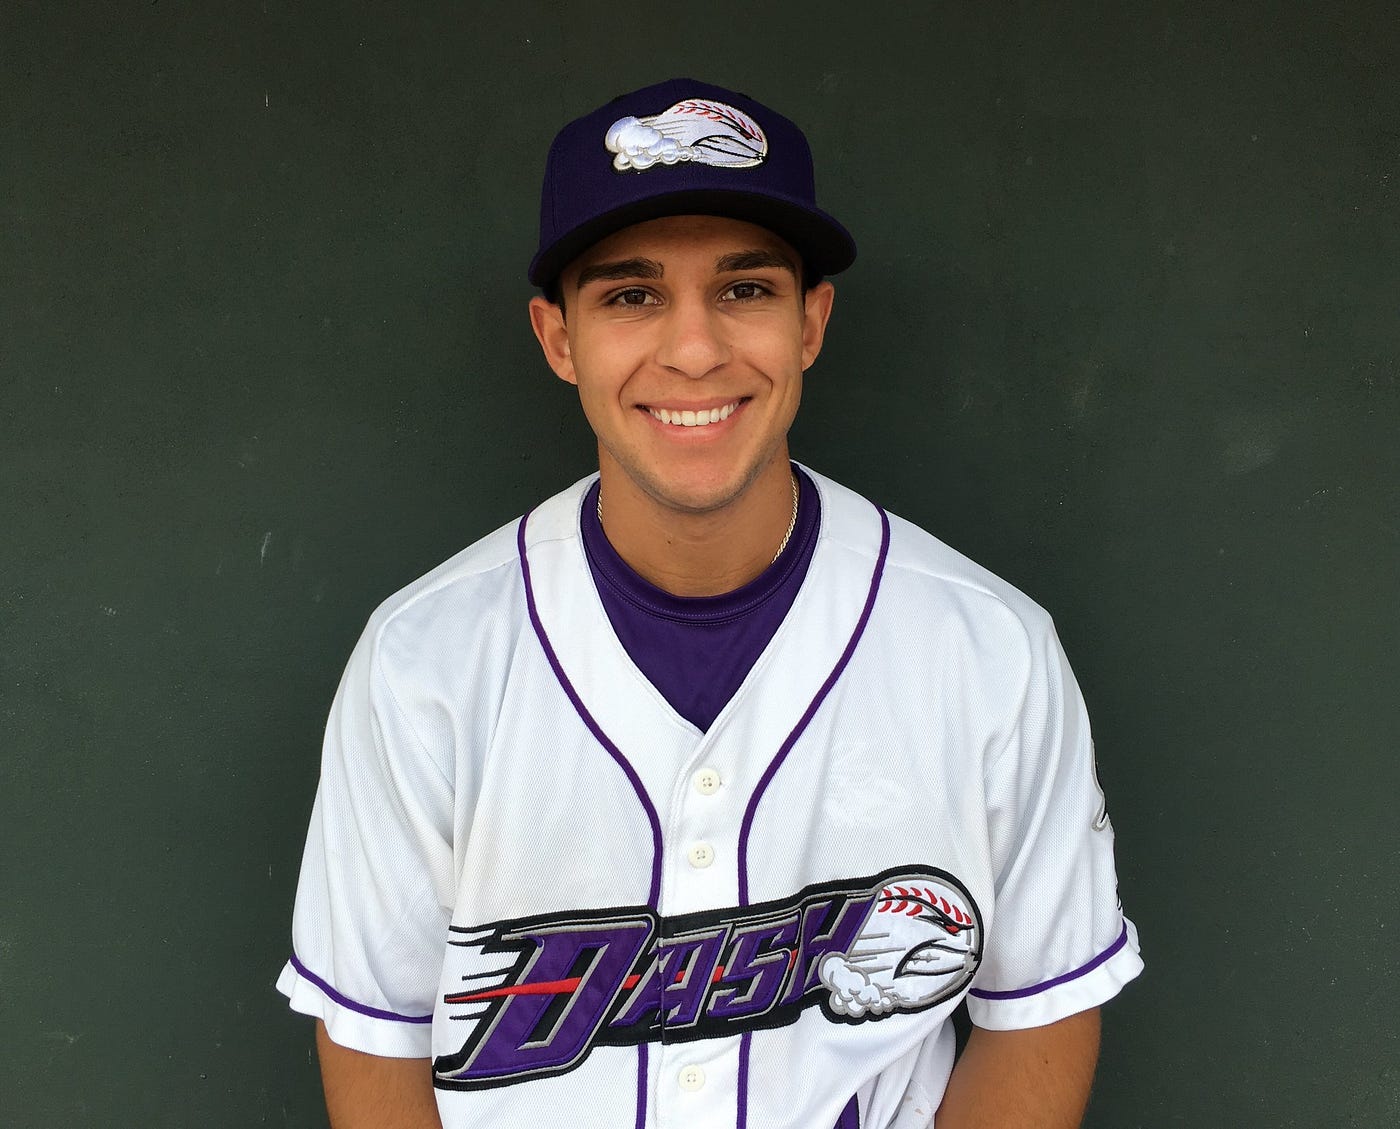 Welcome to Dash City, Nick Madrigal, by Janey Murray